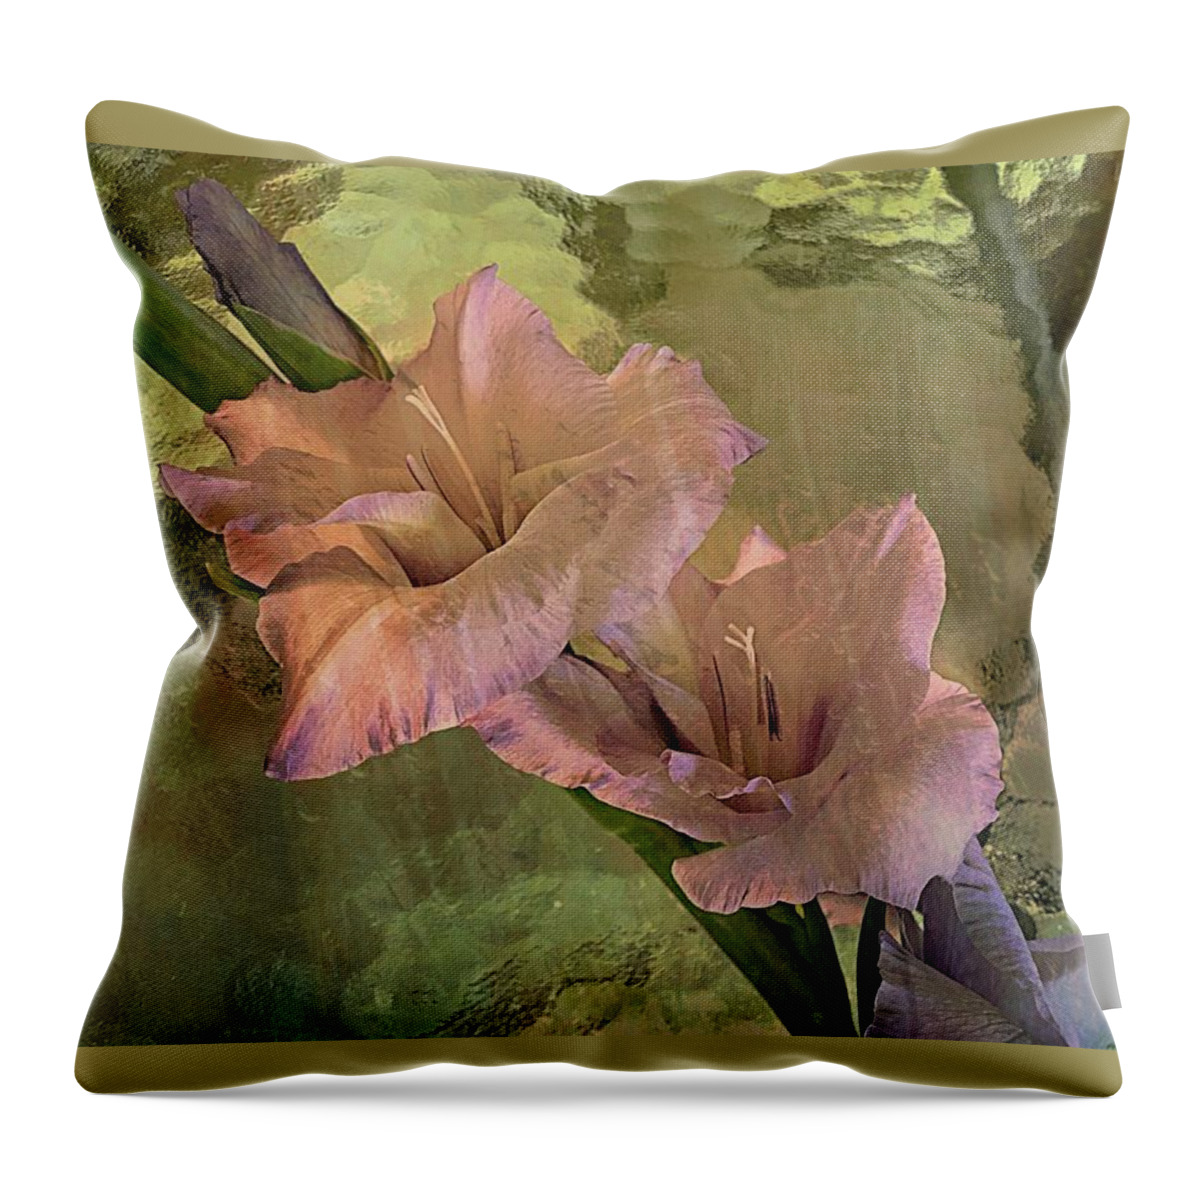 Flower Throw Pillow featuring the photograph Gladiolas by Phyllis Meinke